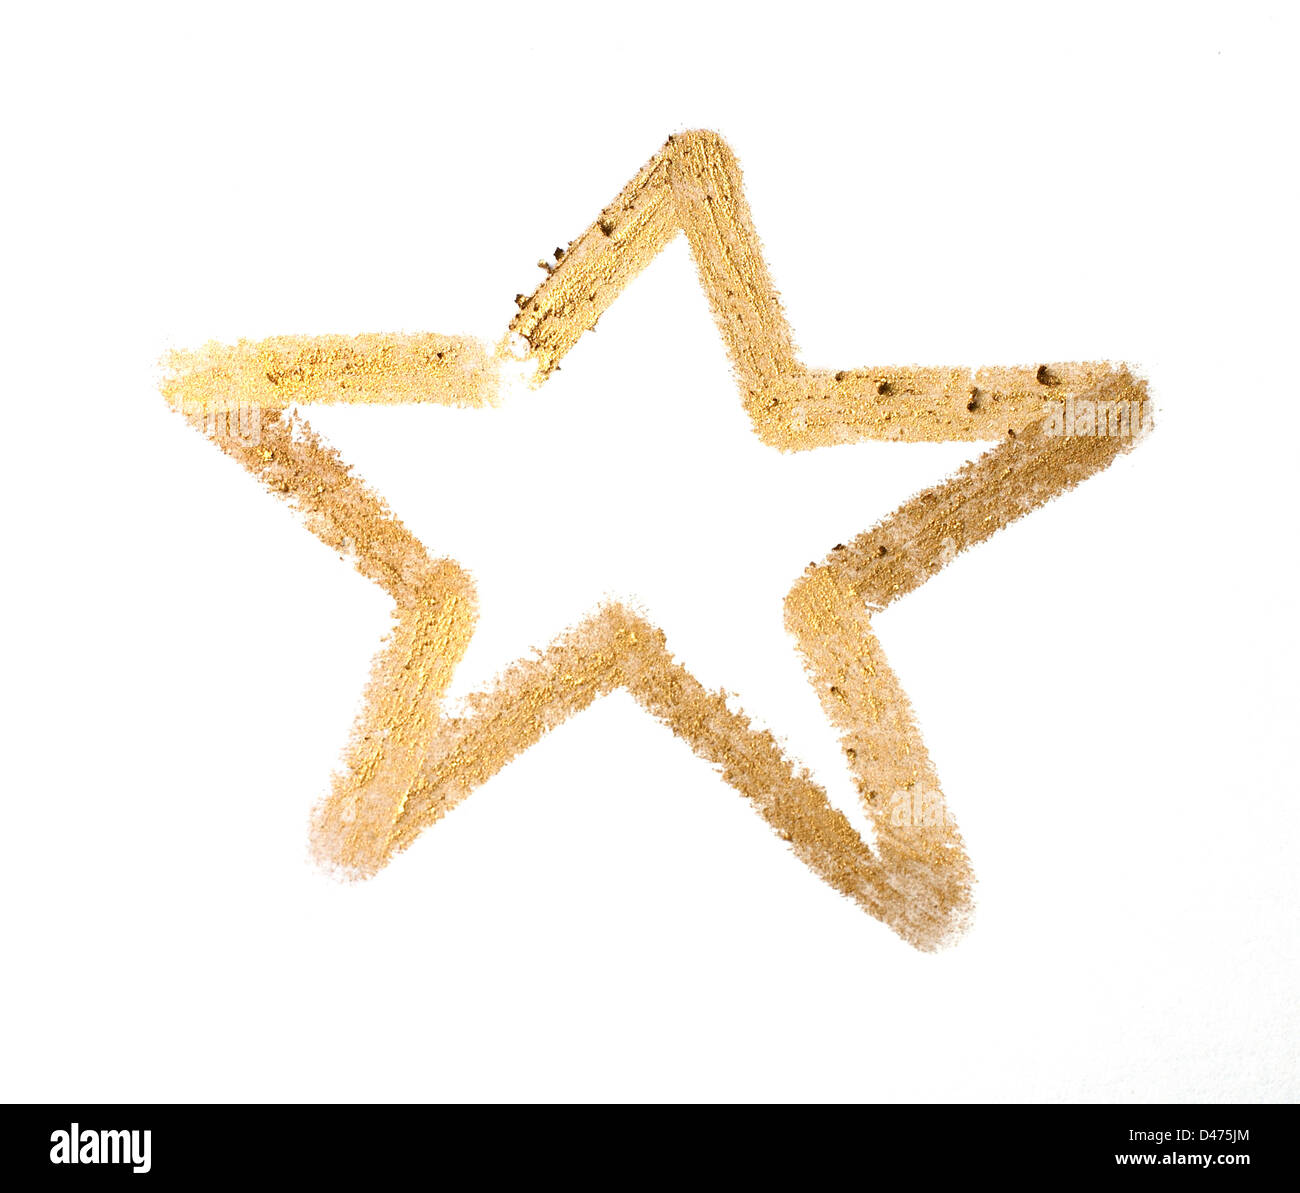 Gold outline of star cut out on white background Stock Photo